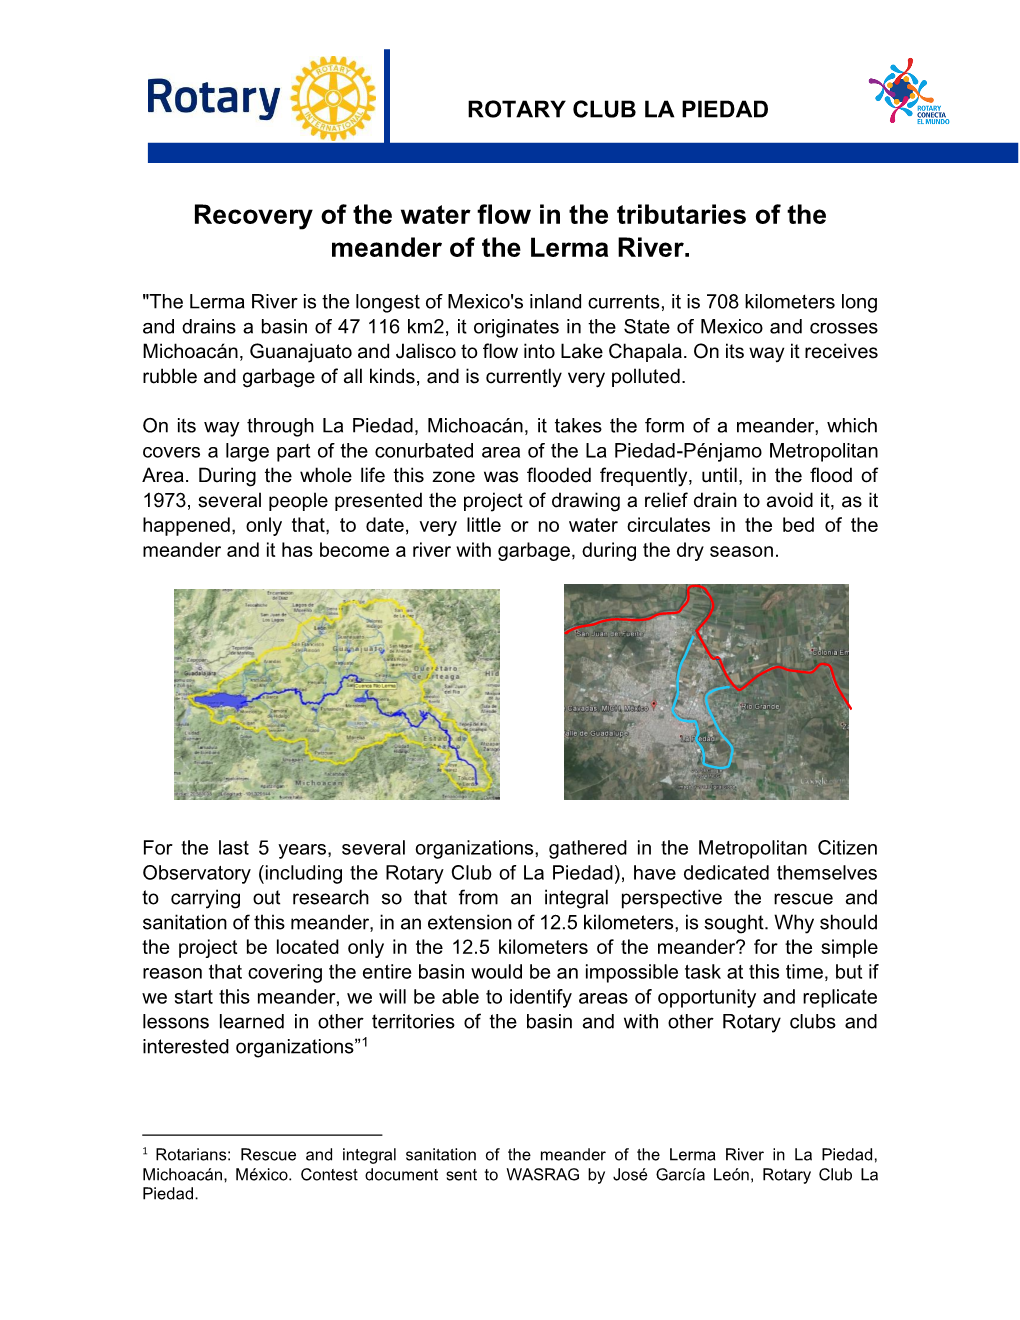 Recovery of the Water Flow in the Tributaries of the Meander of the Lerma River